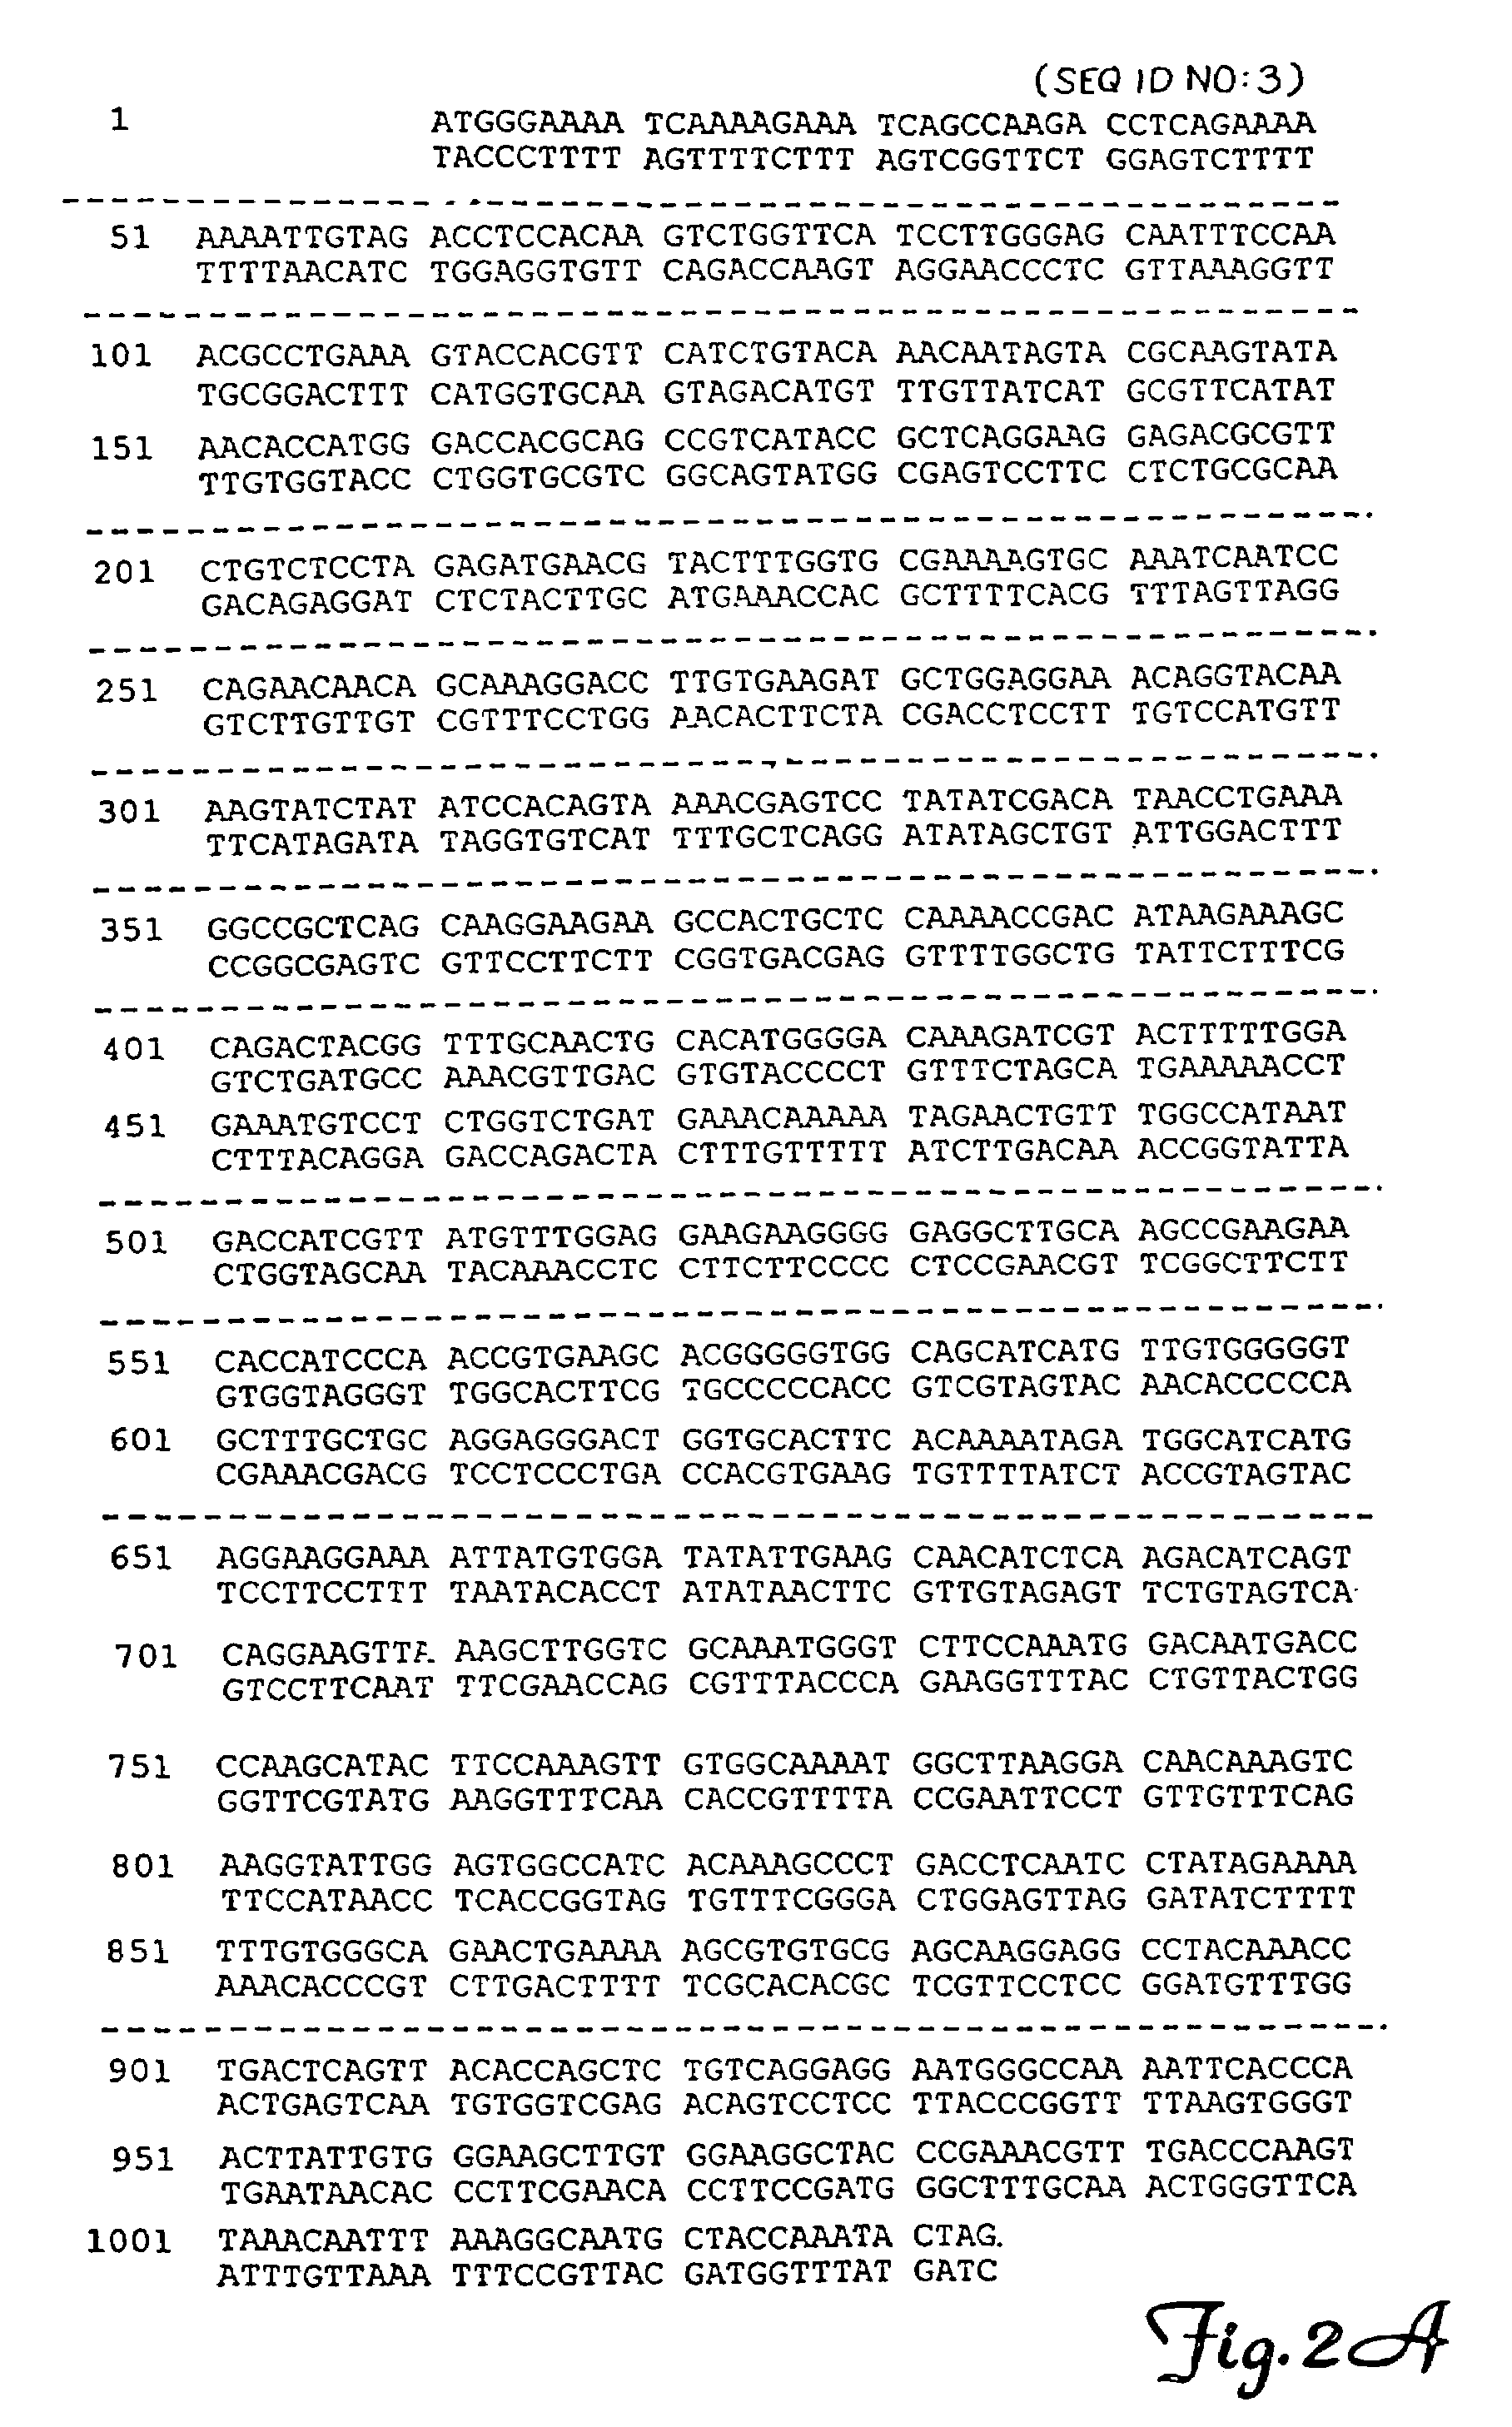 Nucleic acid transfer vector for the introduction of nucleic acid into the DNA of a cell